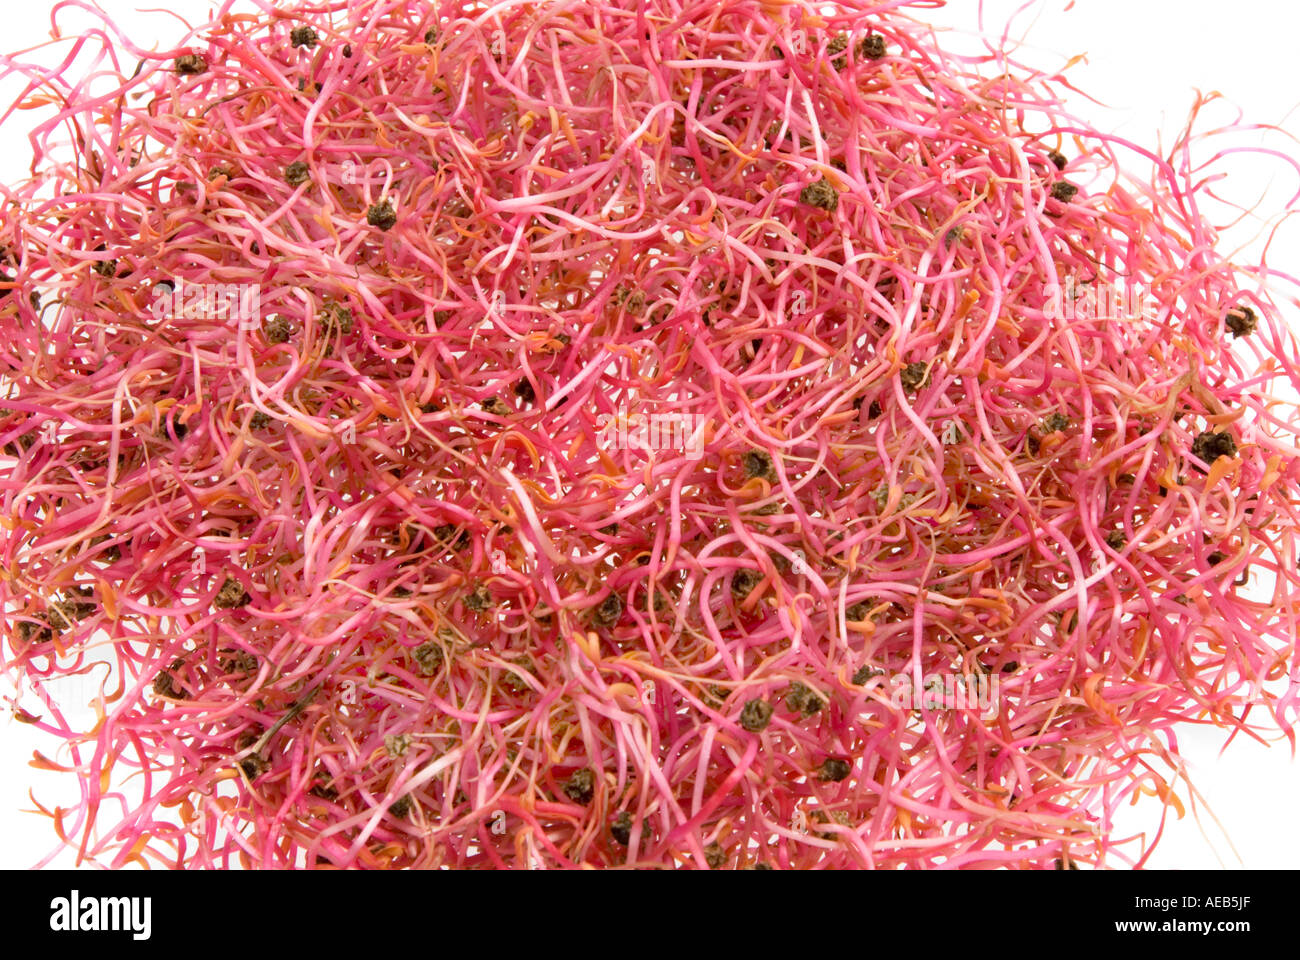 natural ROSABI SPROUTS seed is going out NEW FOOD beetroot red beet SALAD meal modern Stock Photo